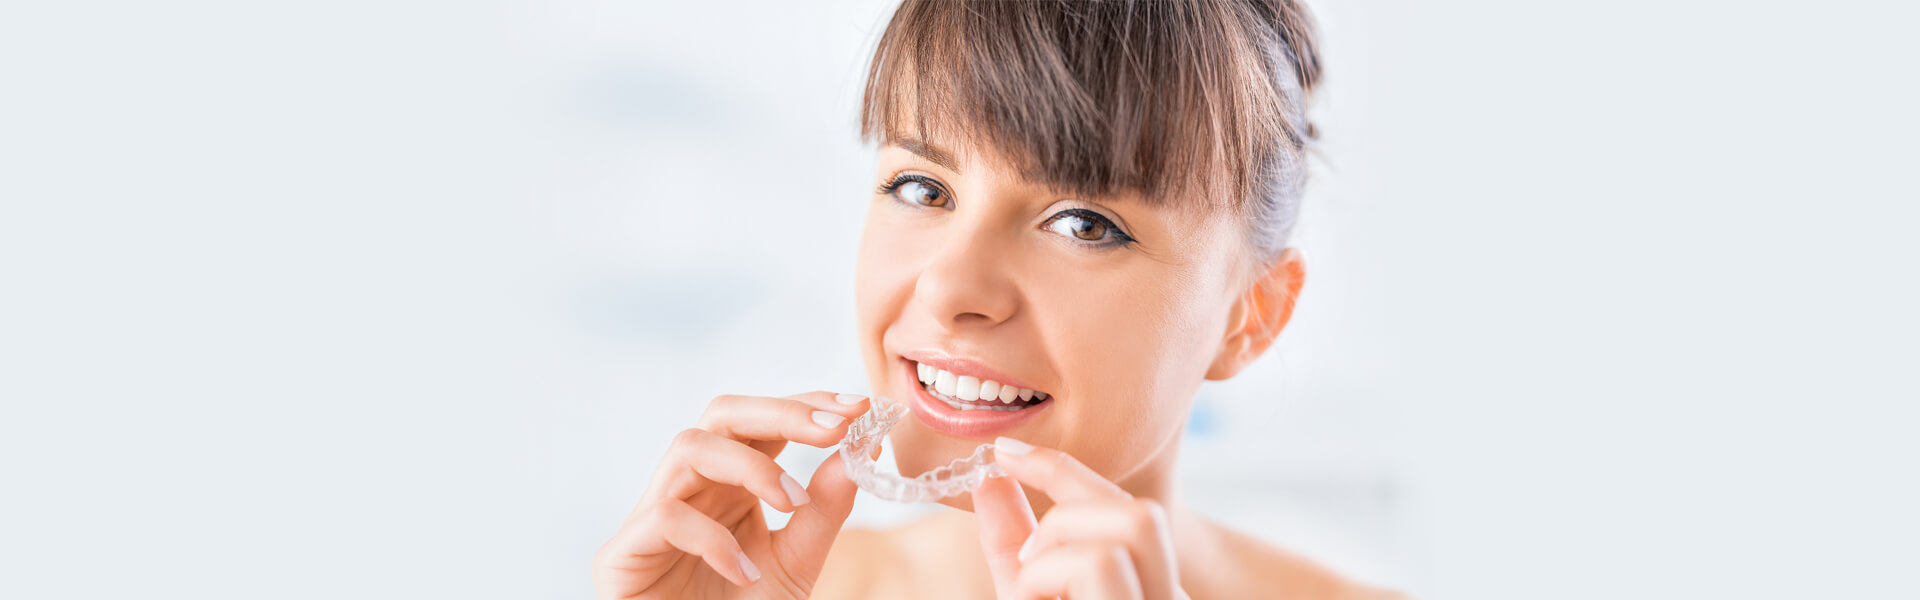 Tips for getting the most out of your invisalign treatment